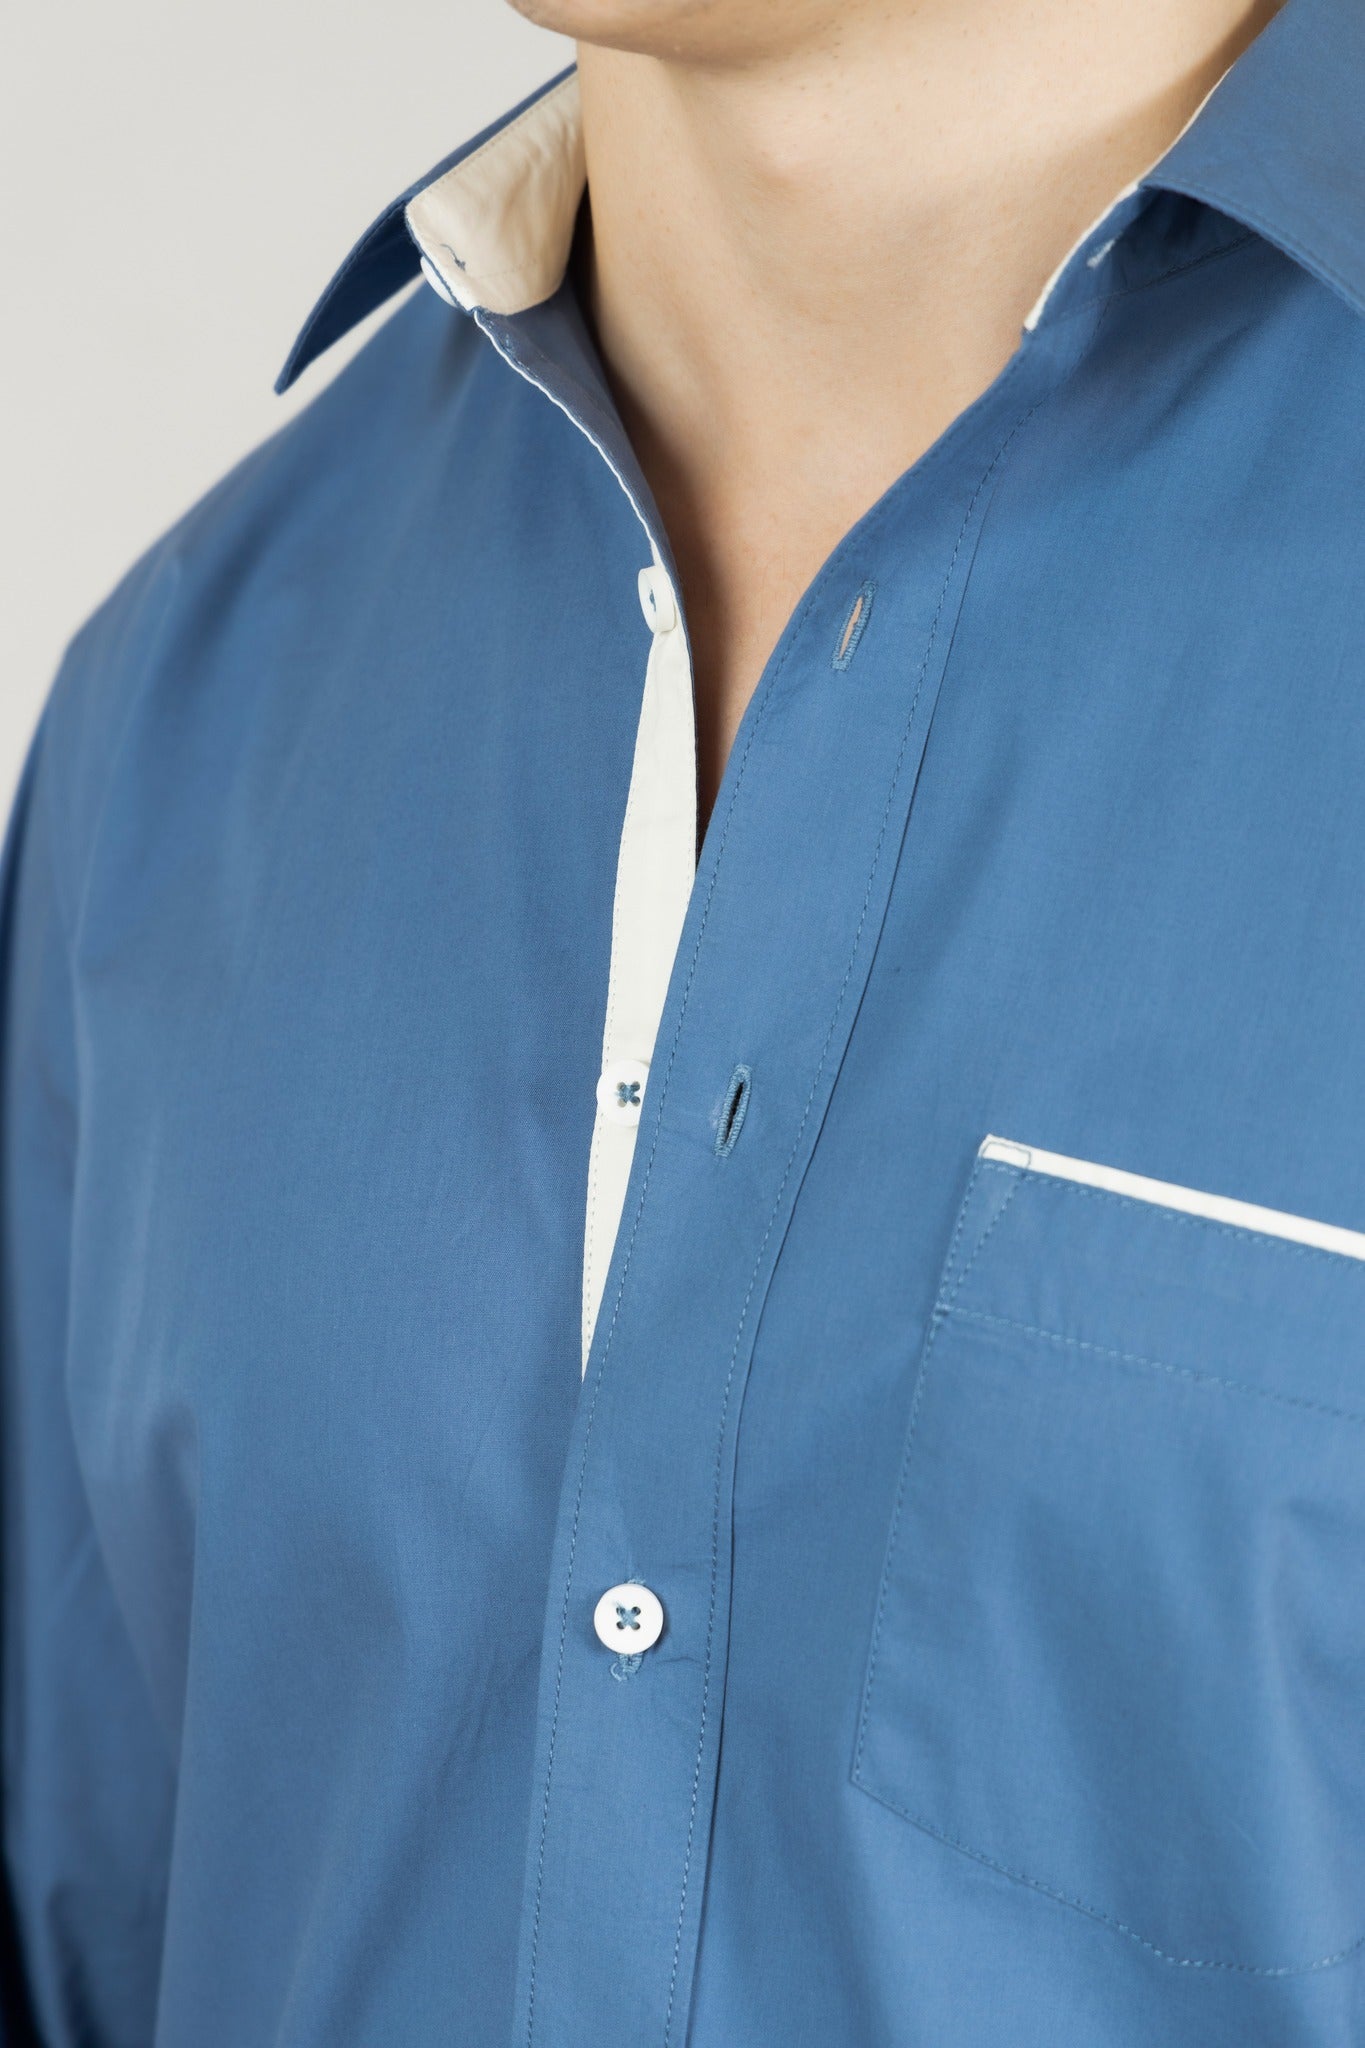 Ash Blue Contrast Men Shirt in Cotton with Full Sleeves & Single Pocket - OZMOD